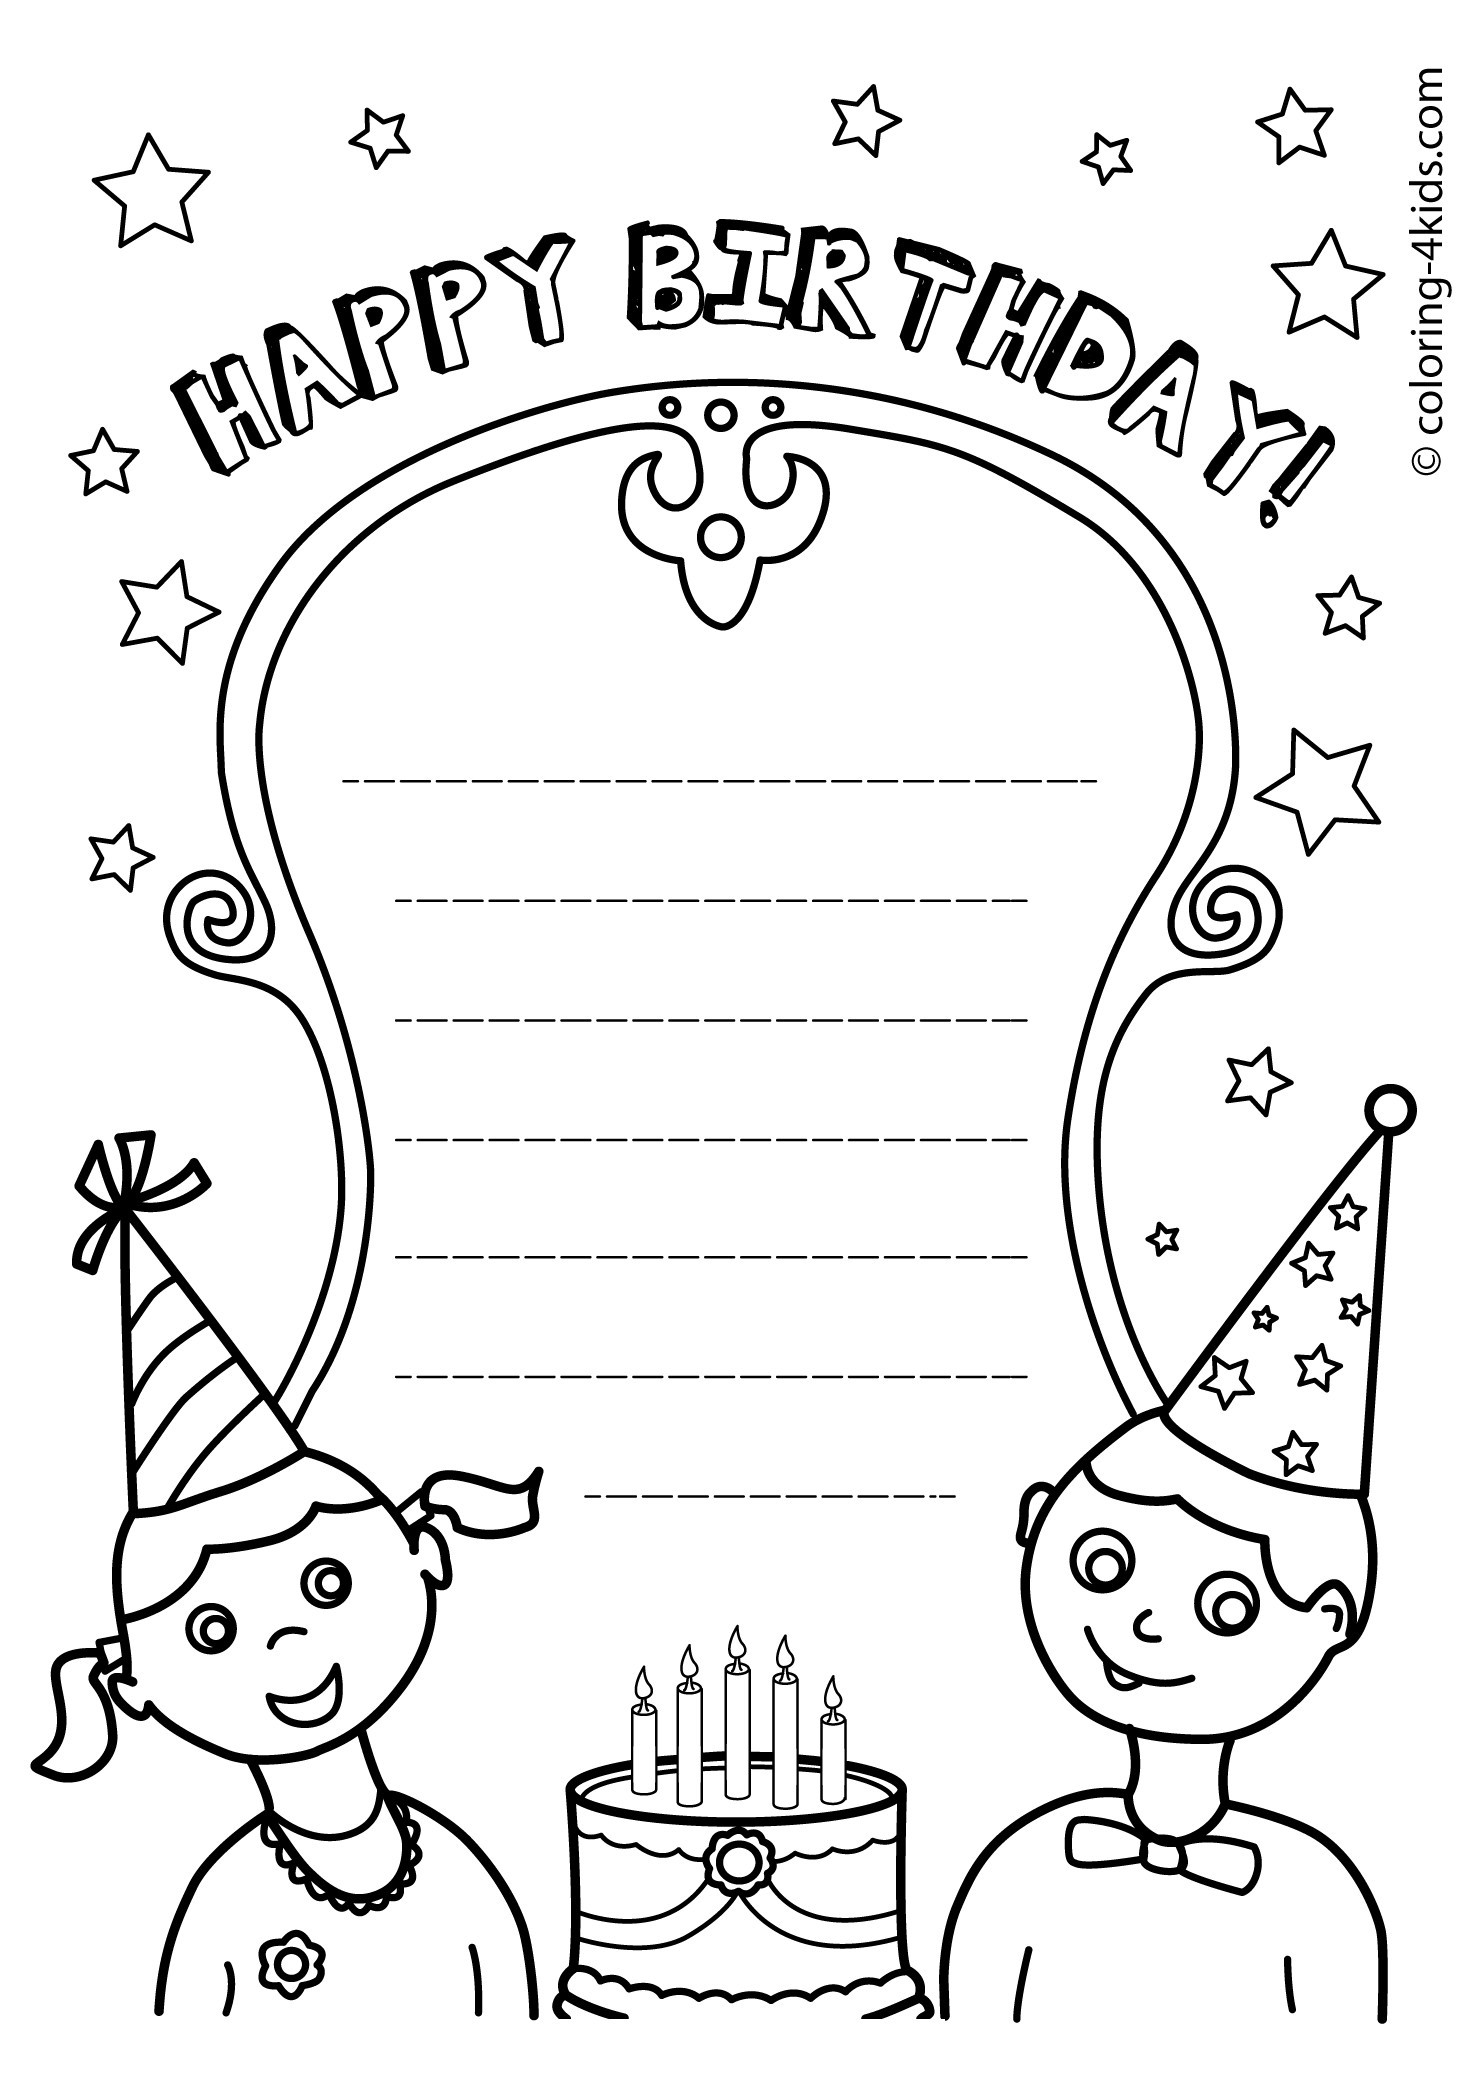 Happy Birthday Coloring Pages For Boys
 50 Gorgeous Coloring Birthday Cards